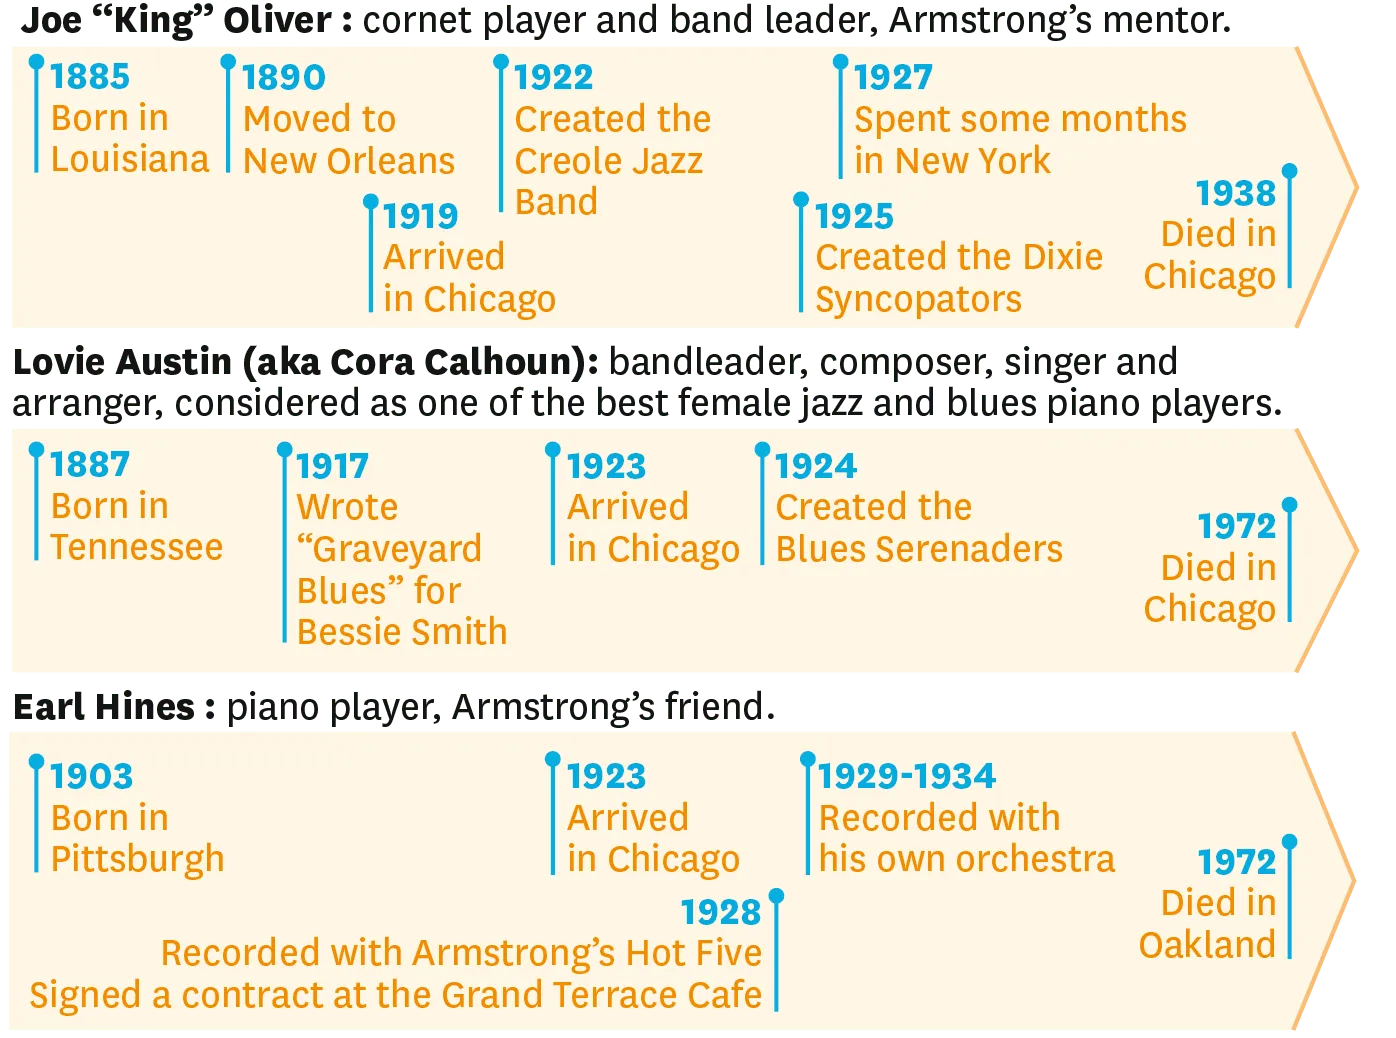 Timeline des dates importantes de la vie de Joe King Oliver, Lovie Austin et Earl Hines. 
  Joe King Oliver was a cornet player and a band leader, Armstrong's mentor. Dates importantes : 1885 born in Louisiana, 1890 Moved to New Orleans, 1919 Arrived in Chicago, 1922 Created the Creole Jazz Band, 1925 Created the Dixie Syncopators 1927 spent some months in New York and in 1938 died in Chicago.
  Lovie Austin (aka Cora Calhoun) was a bandleader, composer, singer and arranger, considered as one of the best female jazz and blues piano players. Dates importantes : 1887 born in Tennessee, 1917 wrote 'Graveyard Blues' for Bessie Smith, 1923 Arrived in Chicago, 1924 created the Blues Serenaders and in 1972 died in Chicago.
  Earl Hines was a piano player and Armstrng's friend. Dates importantes : 1903 born in Pittsburgh, 1923 arrived in Chicago, 1928 recorded with Armstrong's Hot Five and signed a contract at the Grand Terrace Cafe, 1929-1934 recorded with his own orchestra and in 1972 died in Oakland.